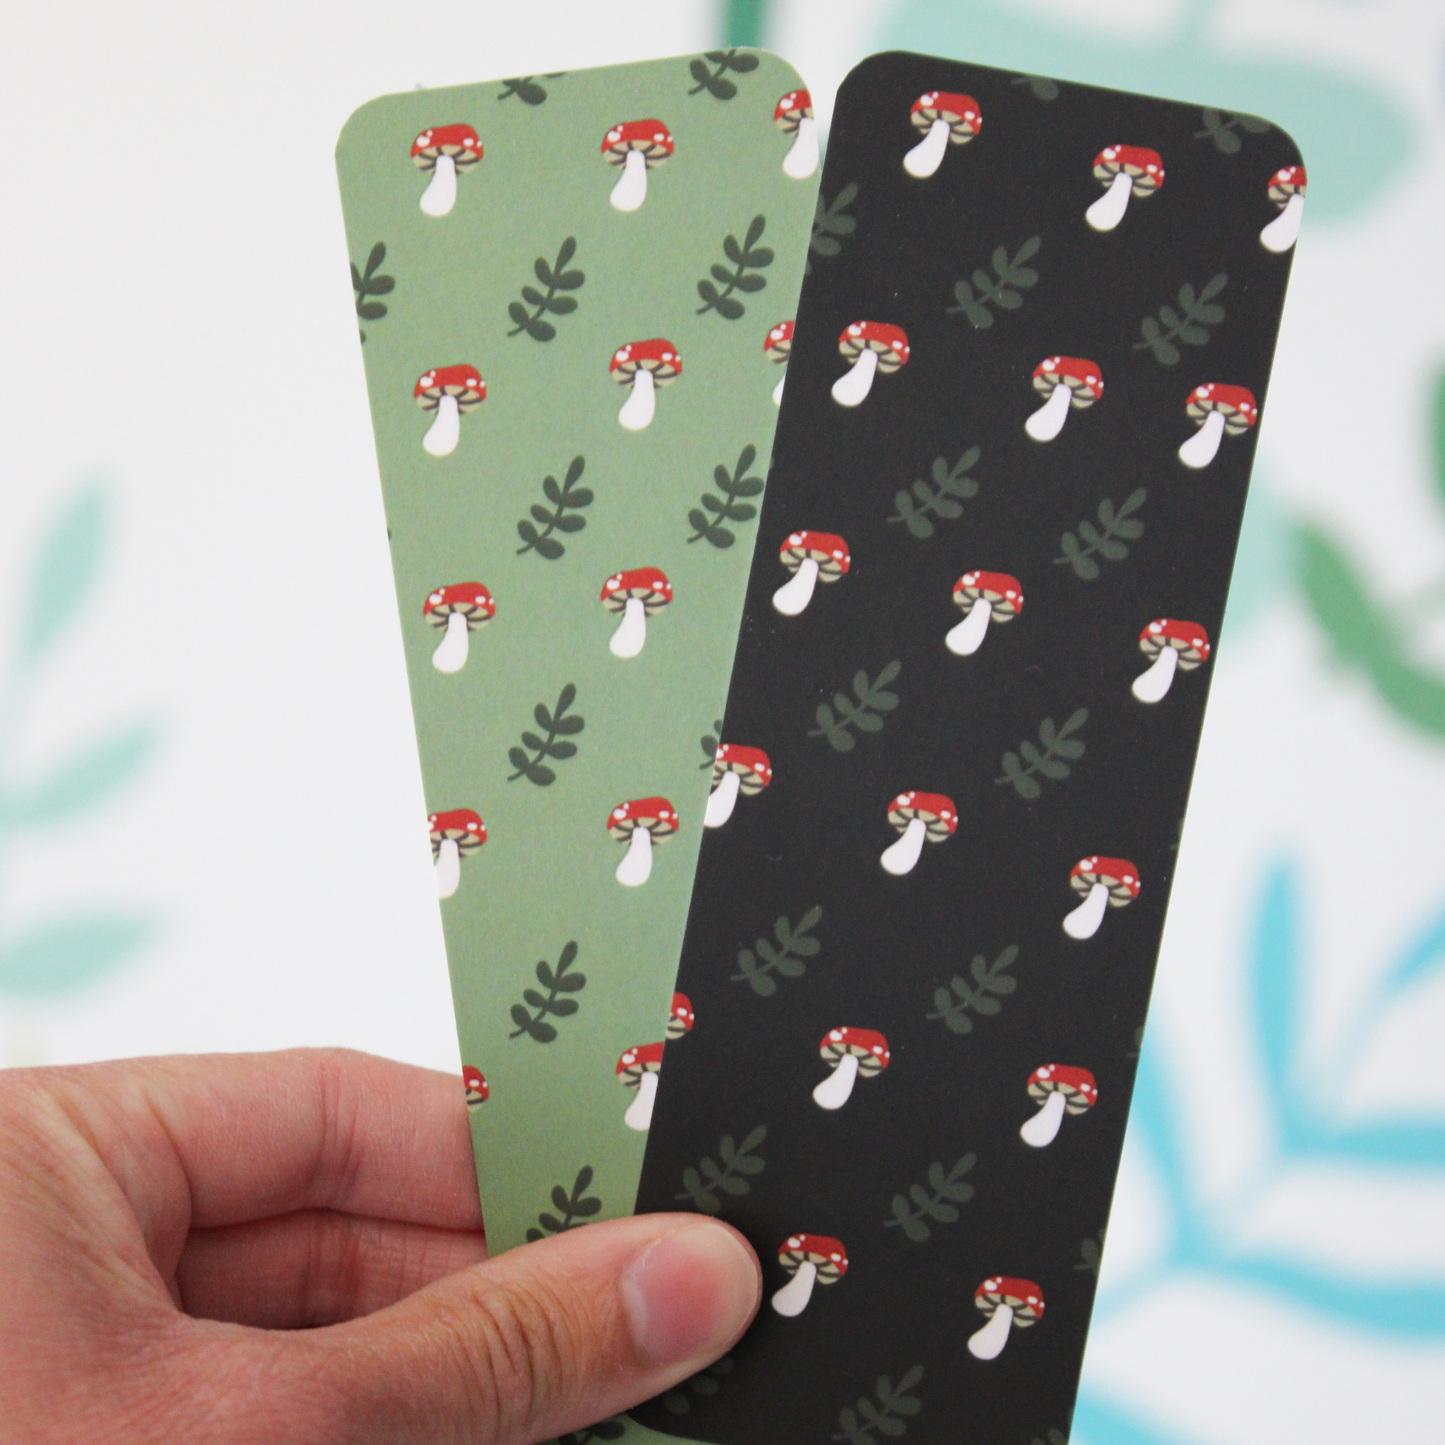 A hand holding two bookmarks. One has the green mushroom pattern and one has the black mushroom pattern. 